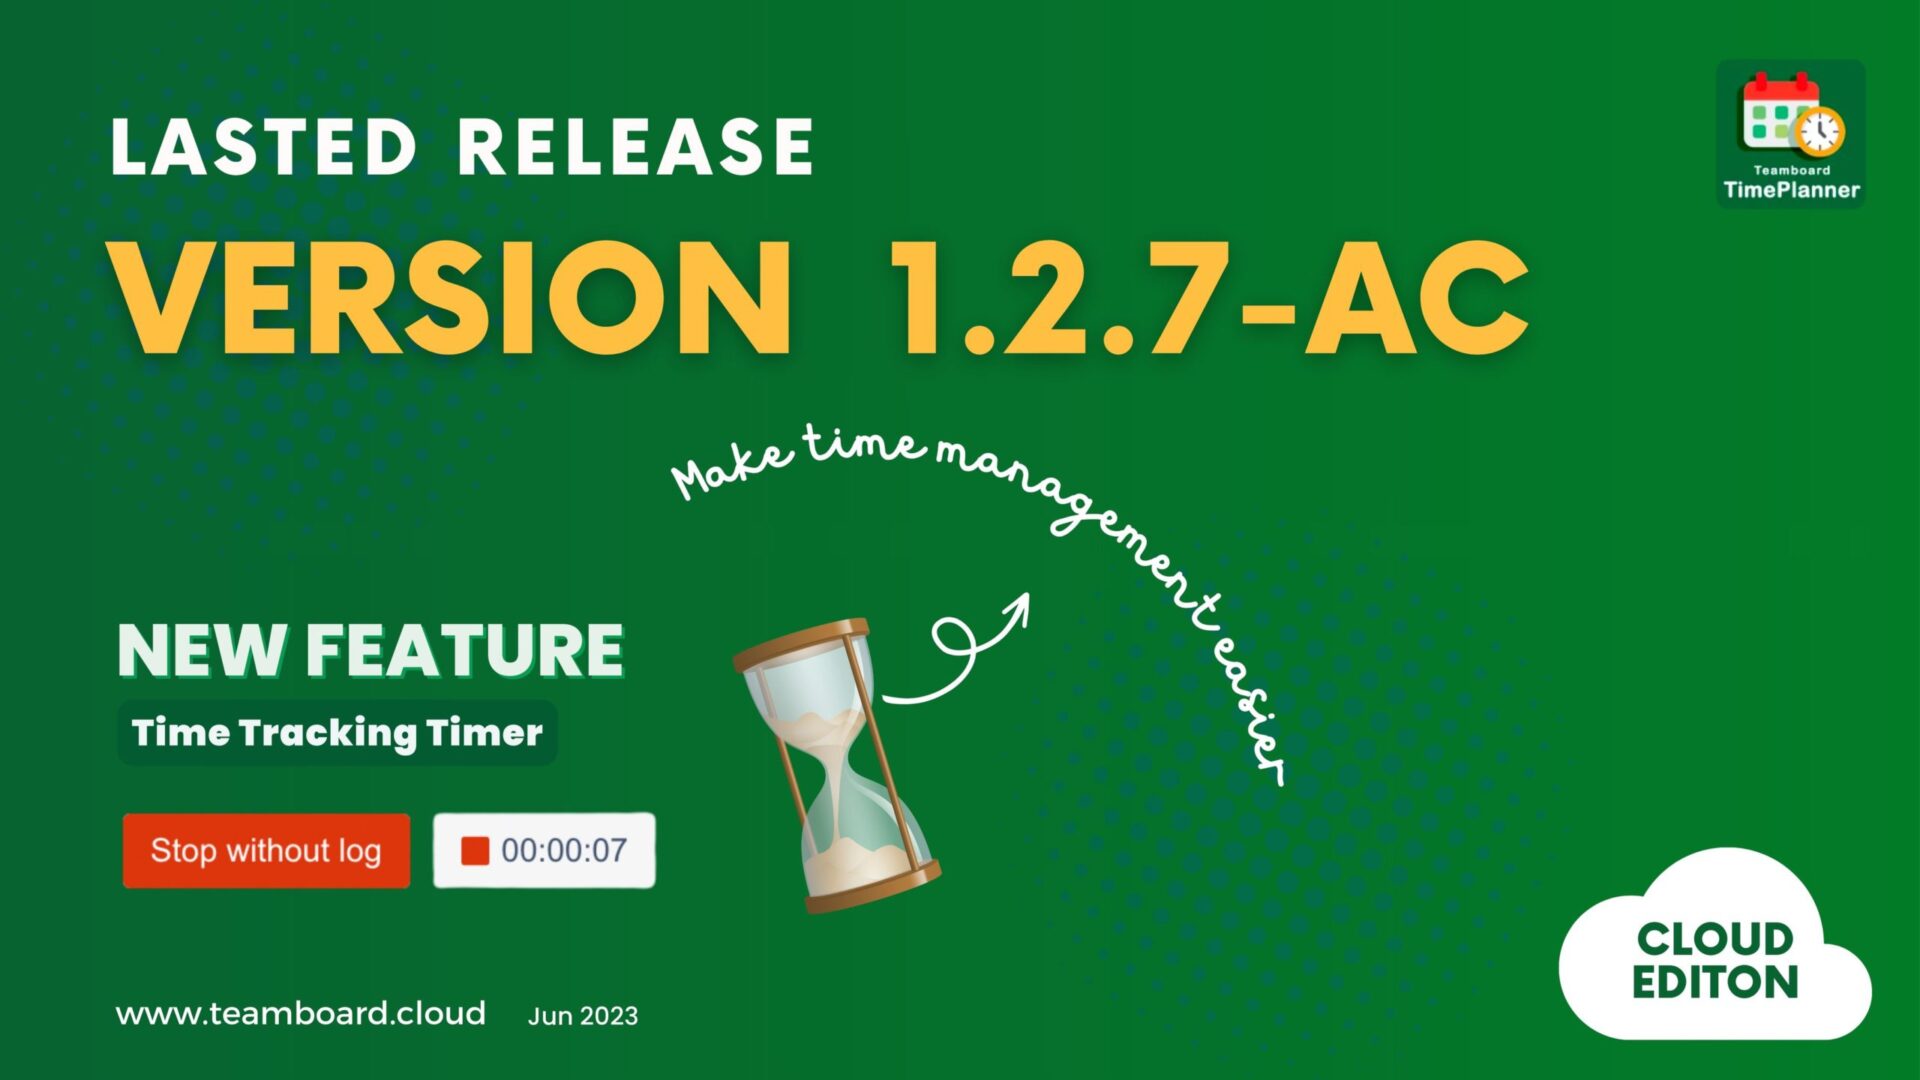 Lasted Release: Time Tracking Timer | Version Release 1.2.7-AC | Cloud Editon